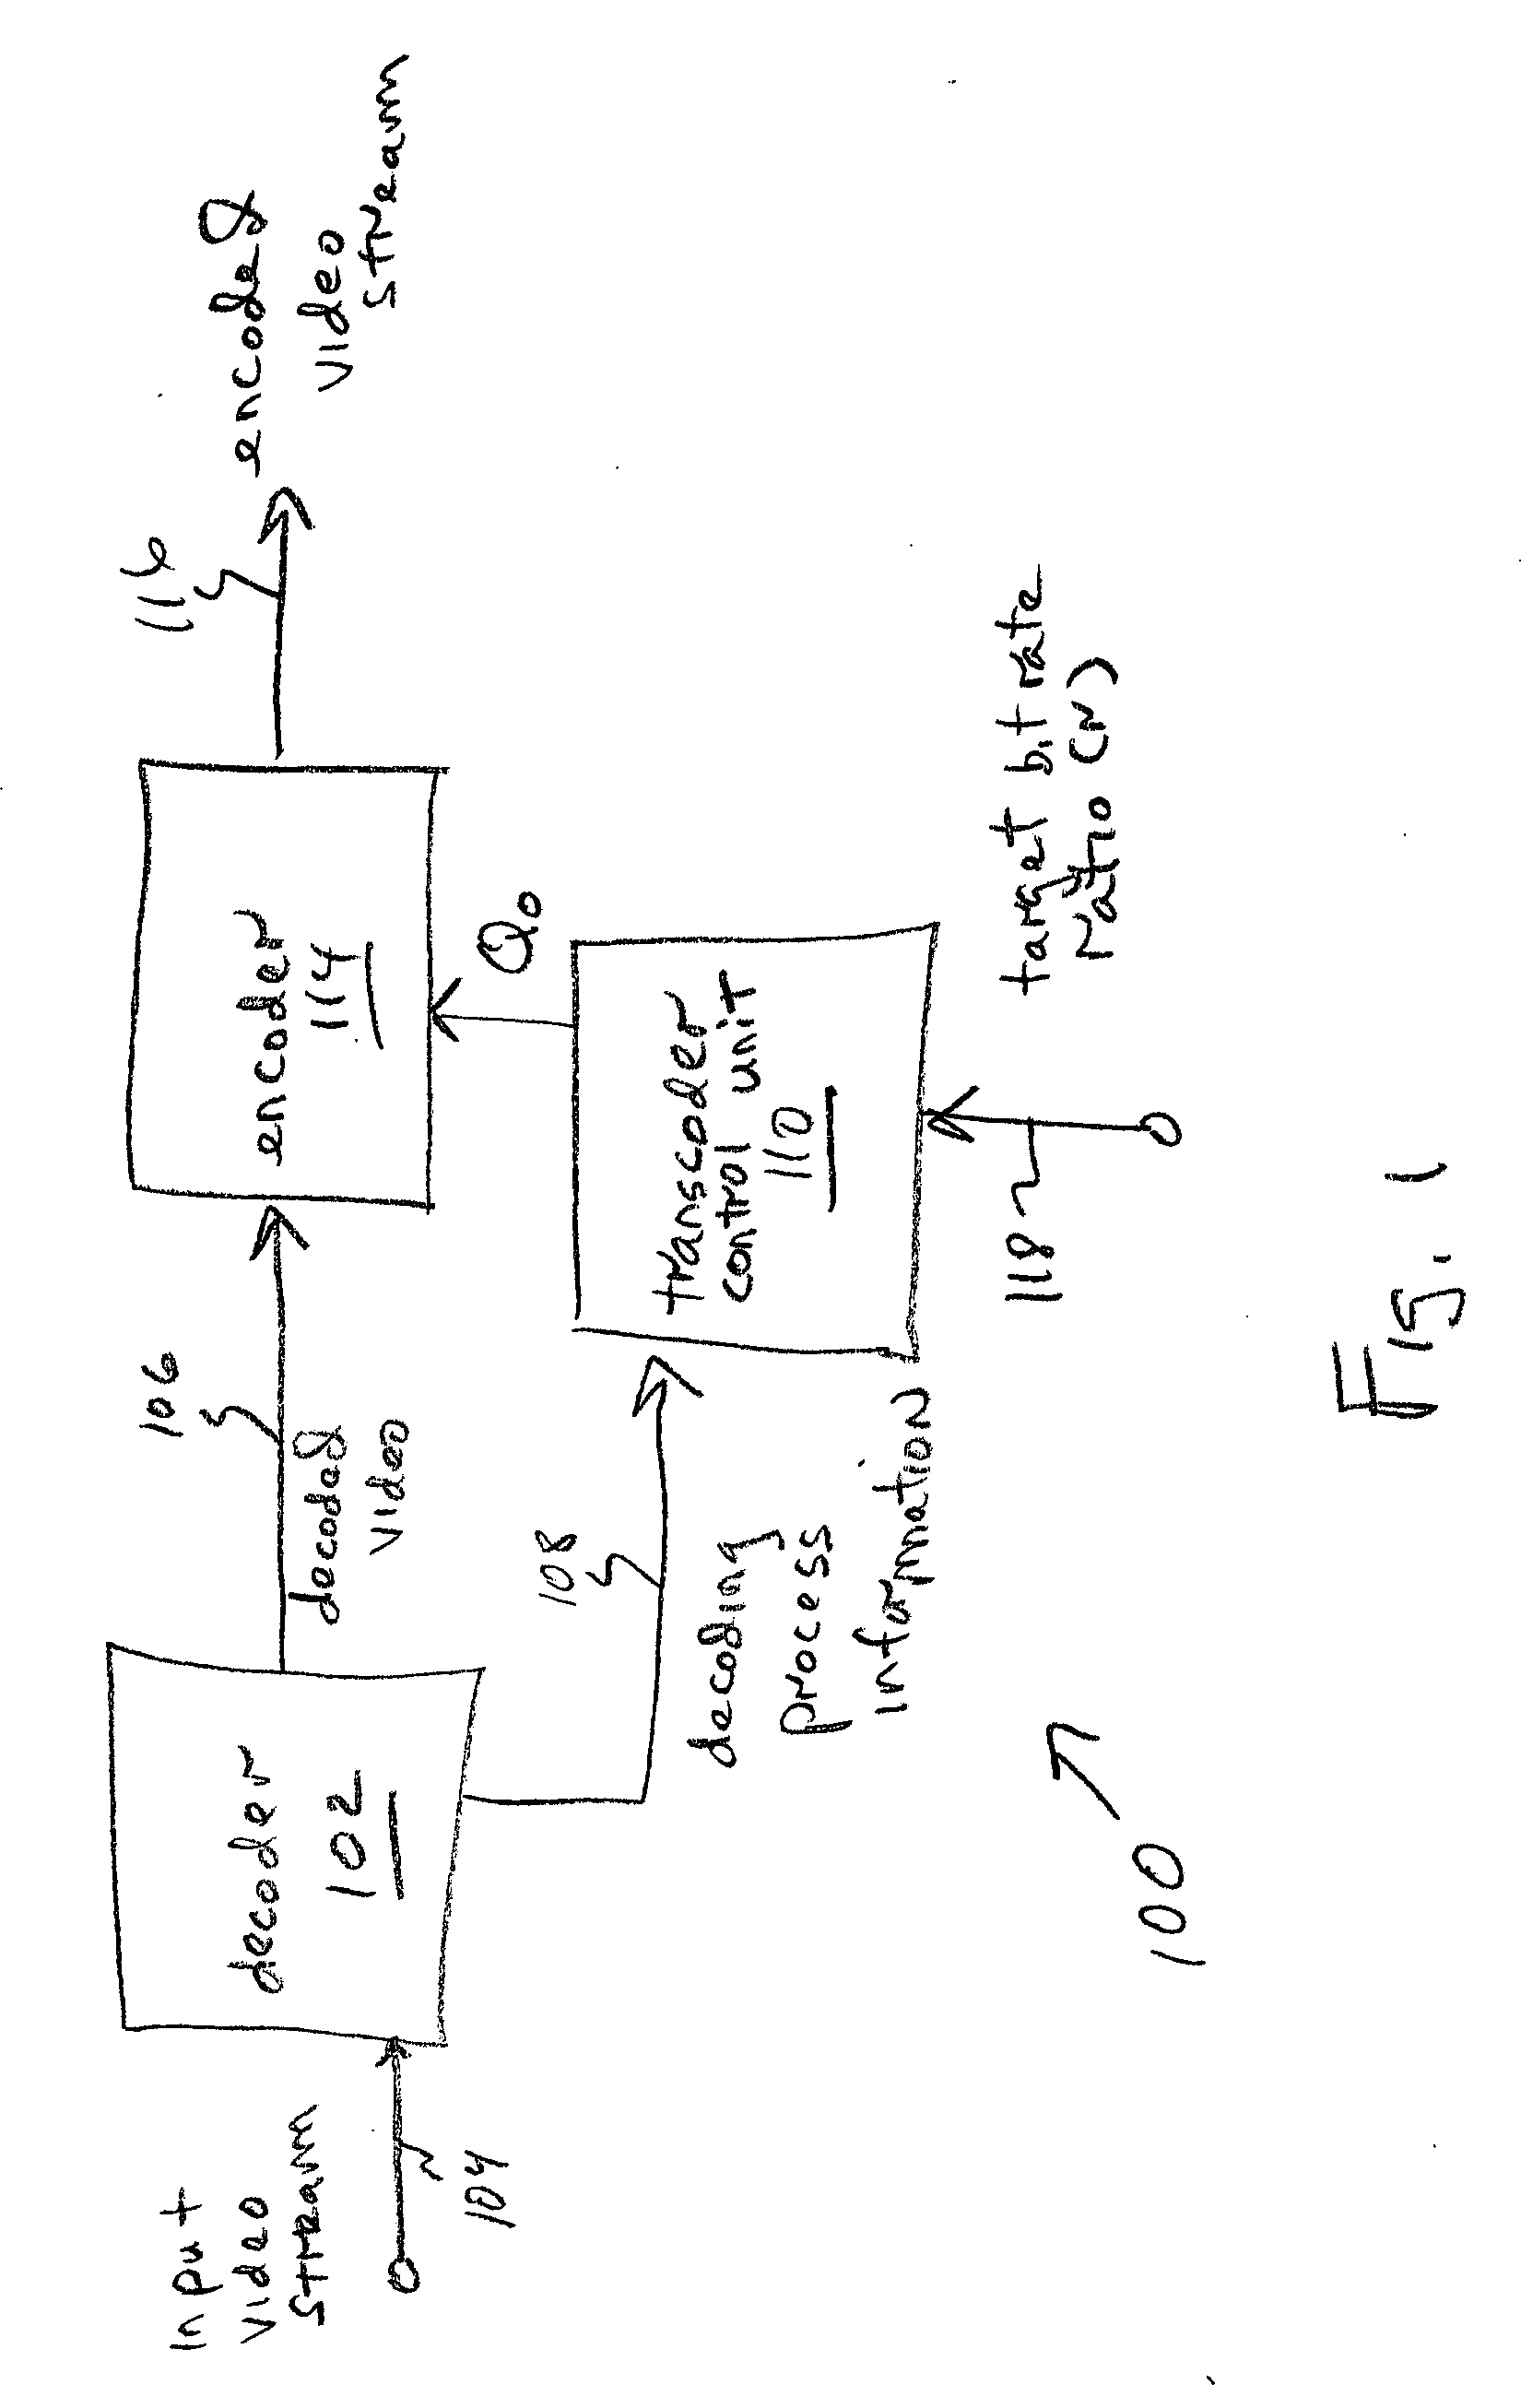 System and method for transcoding with adaptive bit rate control